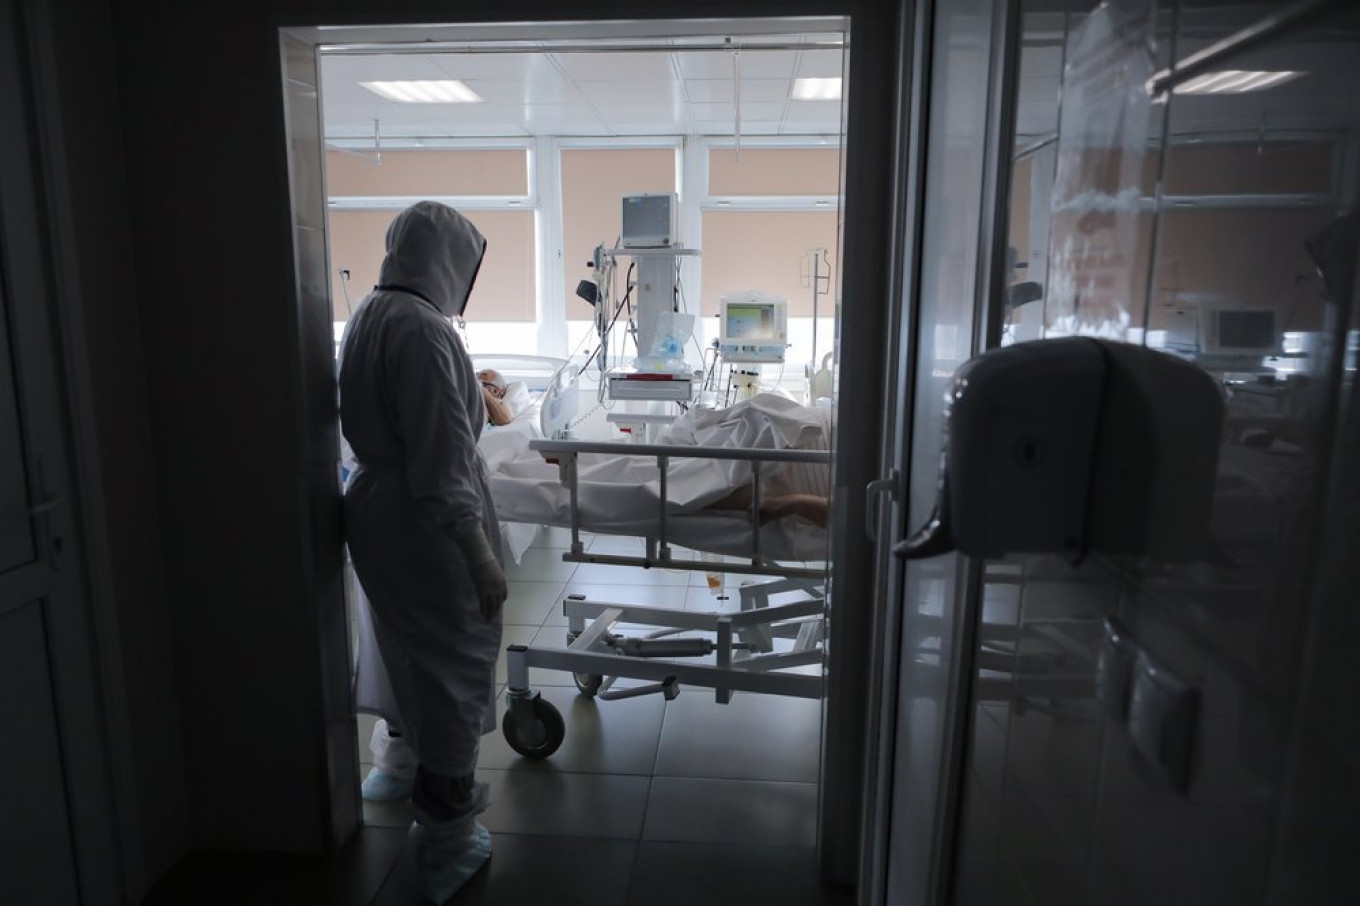 Russia’s Coronavirus Deaths Surpass 500 in New One-Day Record